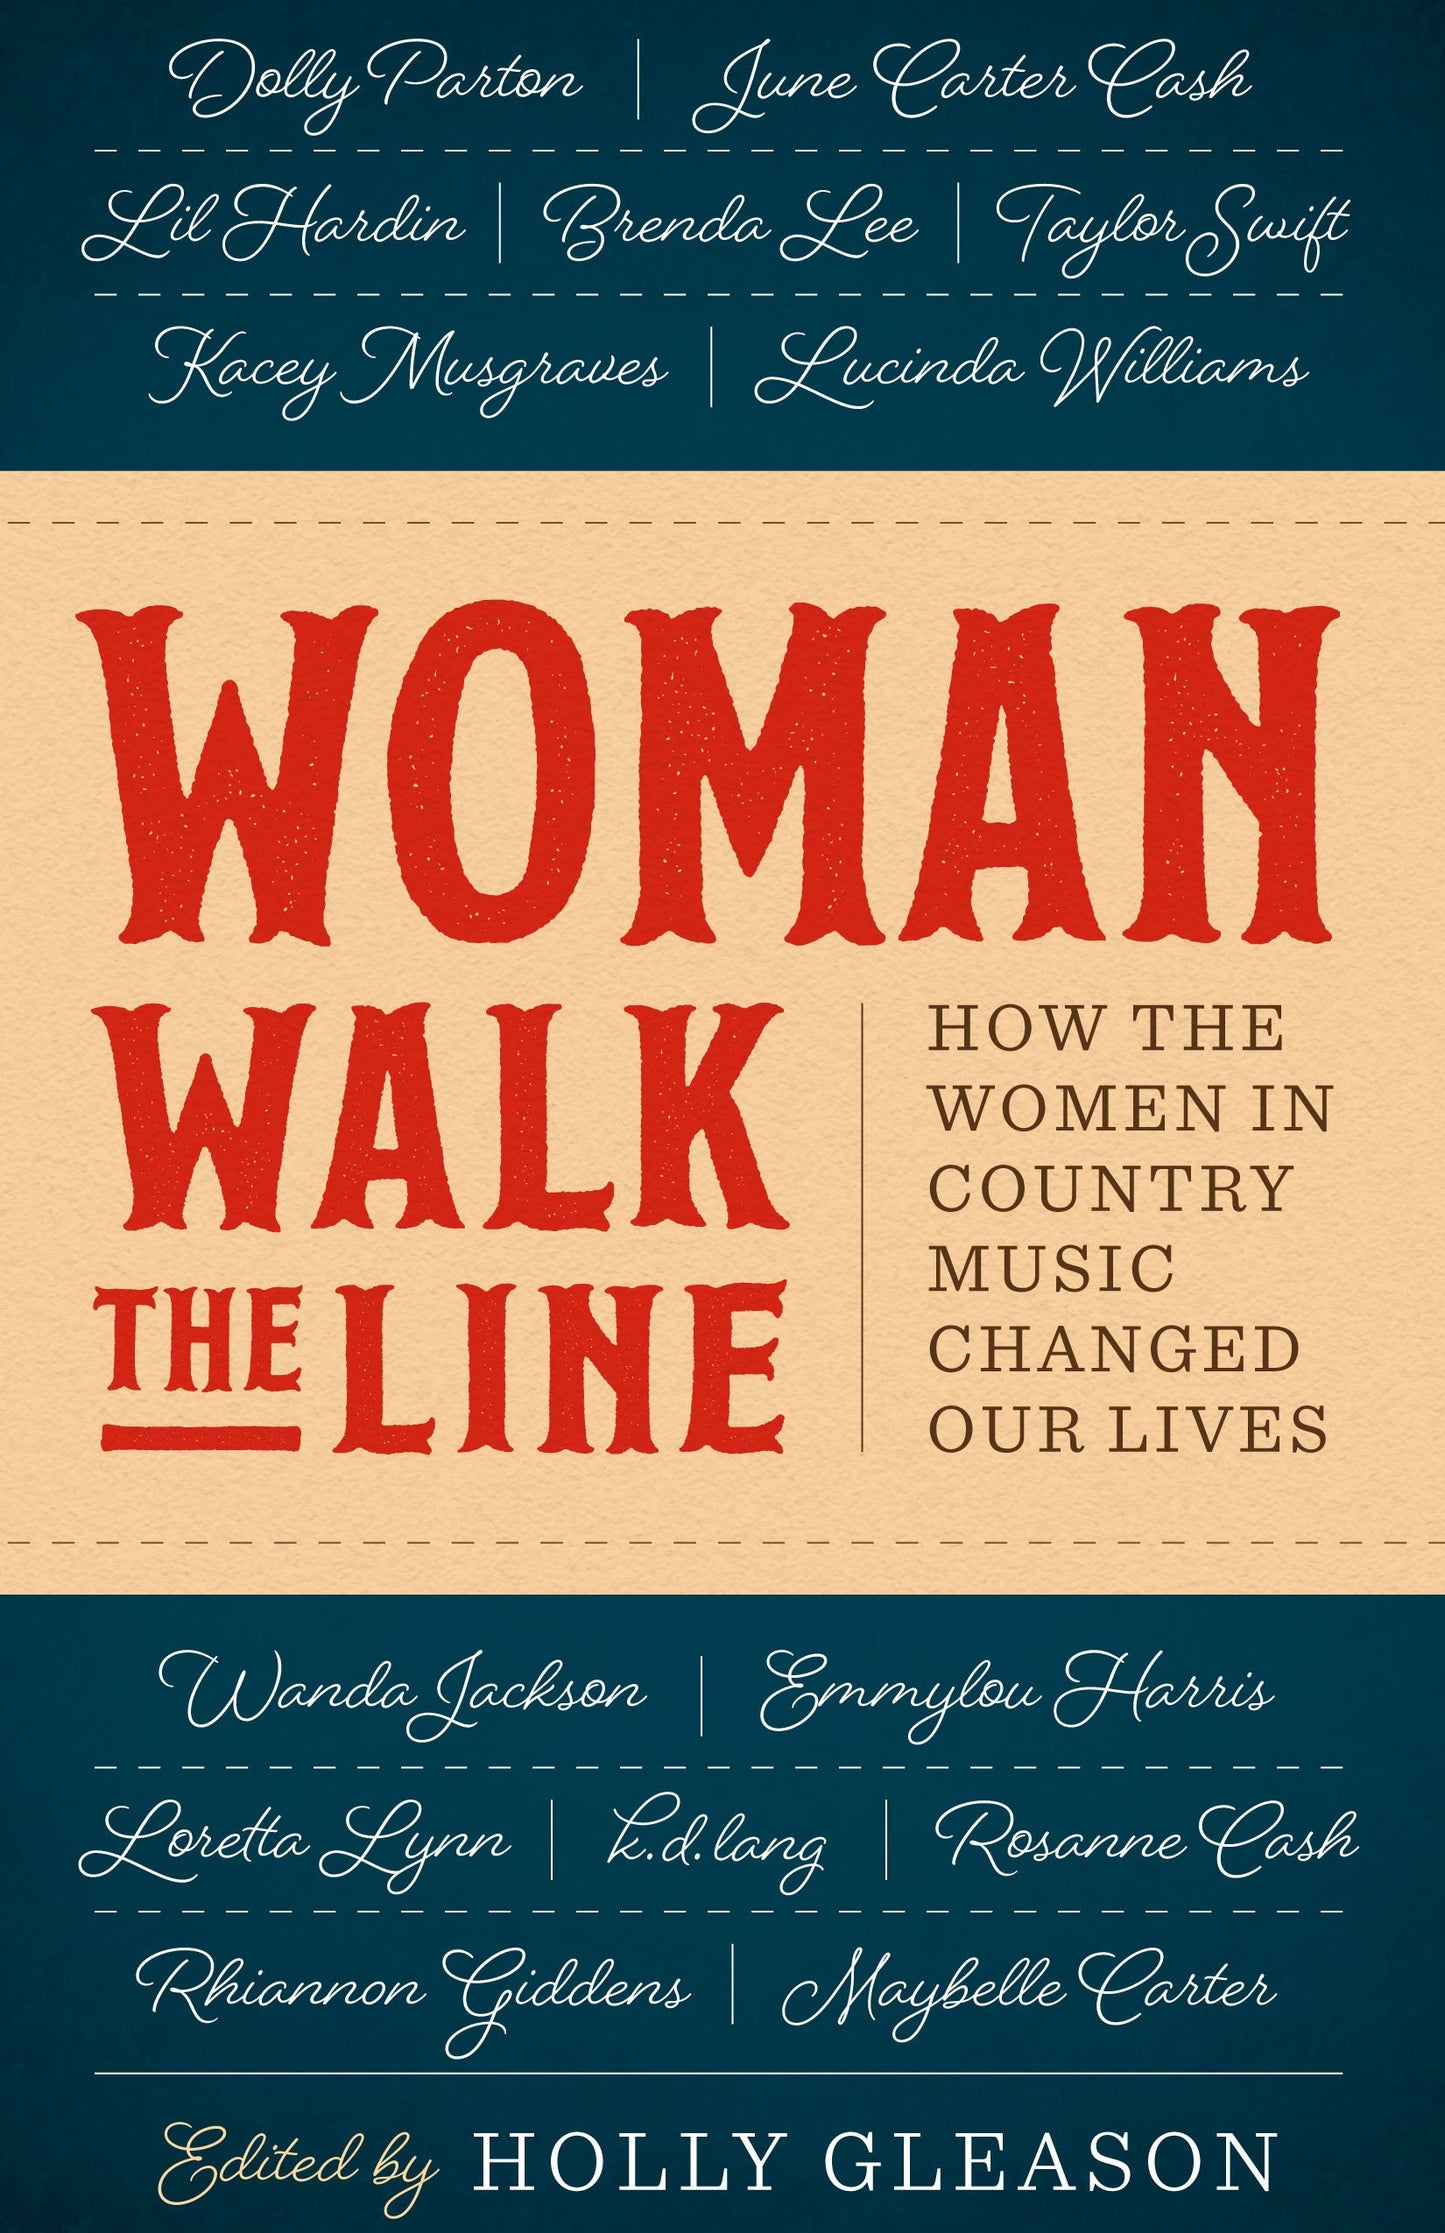 WOMAN WALK THE LINE: HOW THE WOMEN IN COUNTRY MUSIC CHANGED OUR LIVES - BOOK